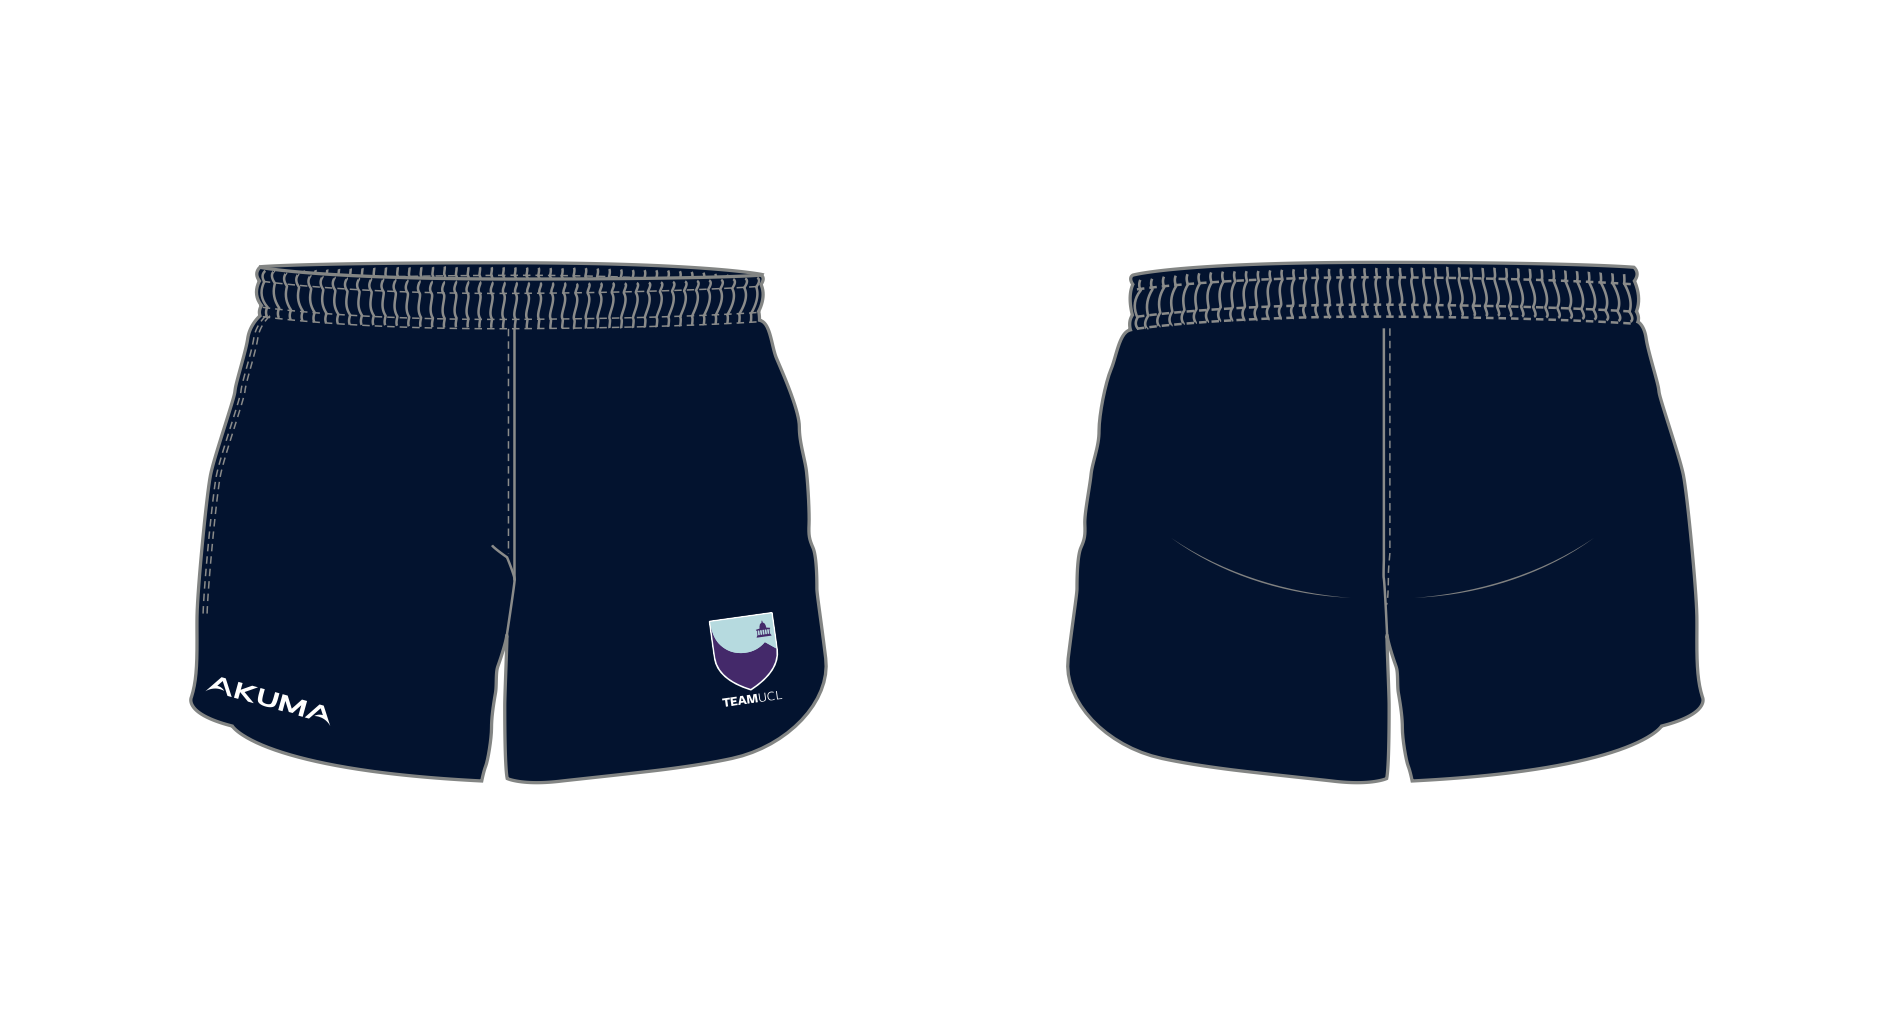 Navy blue short with Akuma logo and TEAMUCL lego